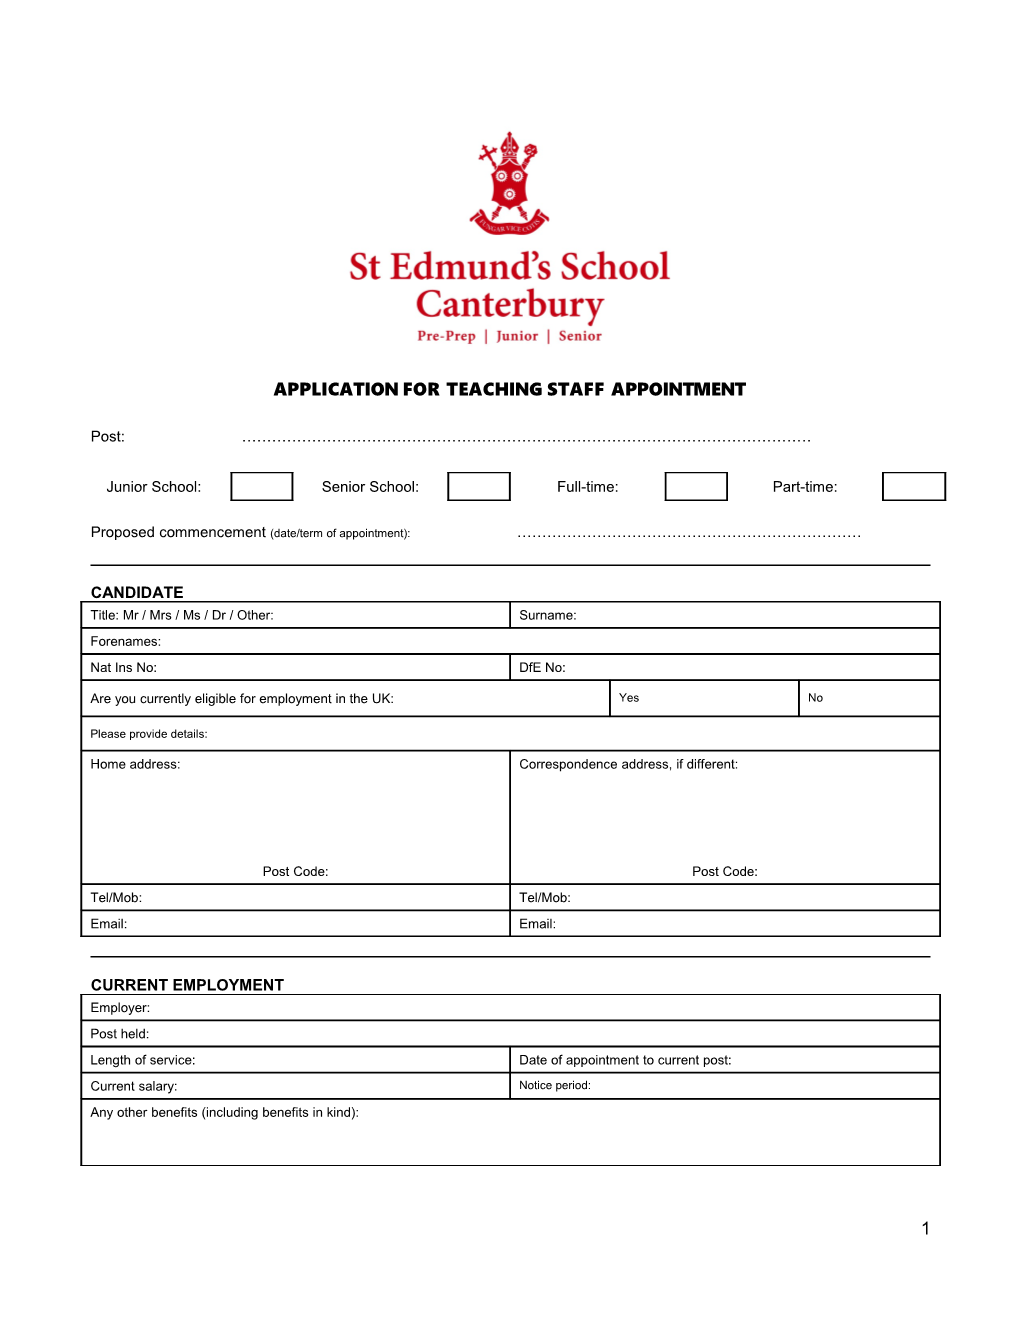 Application for Teaching Staff Appointment